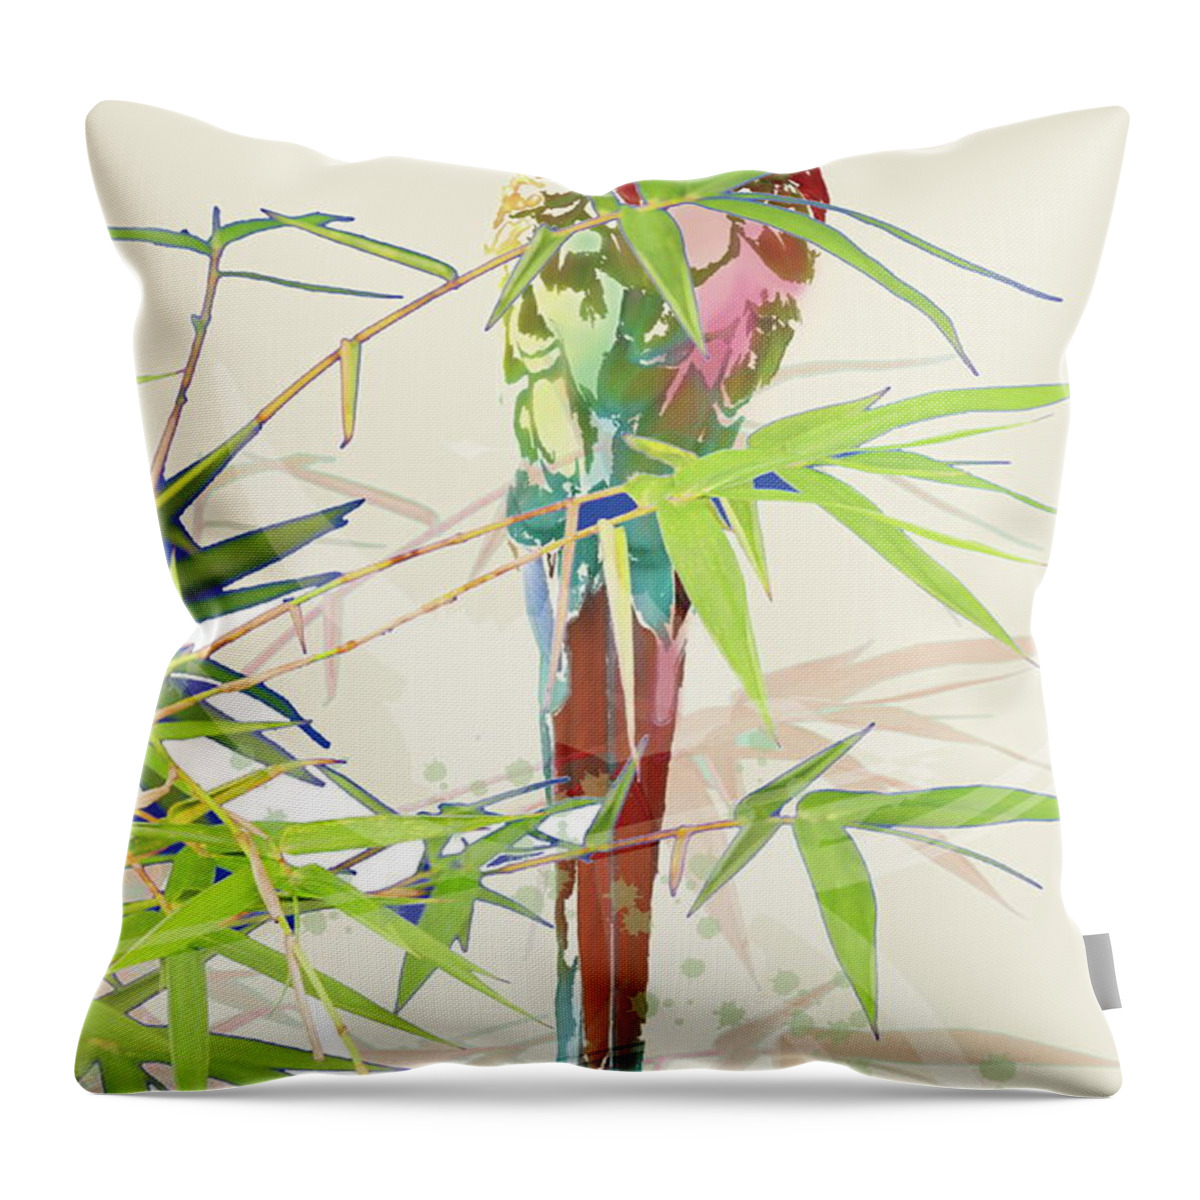 Tranquility Throw Pillow featuring the digital art Bird With Chinese Bamboo Leaves by Meg Takamura